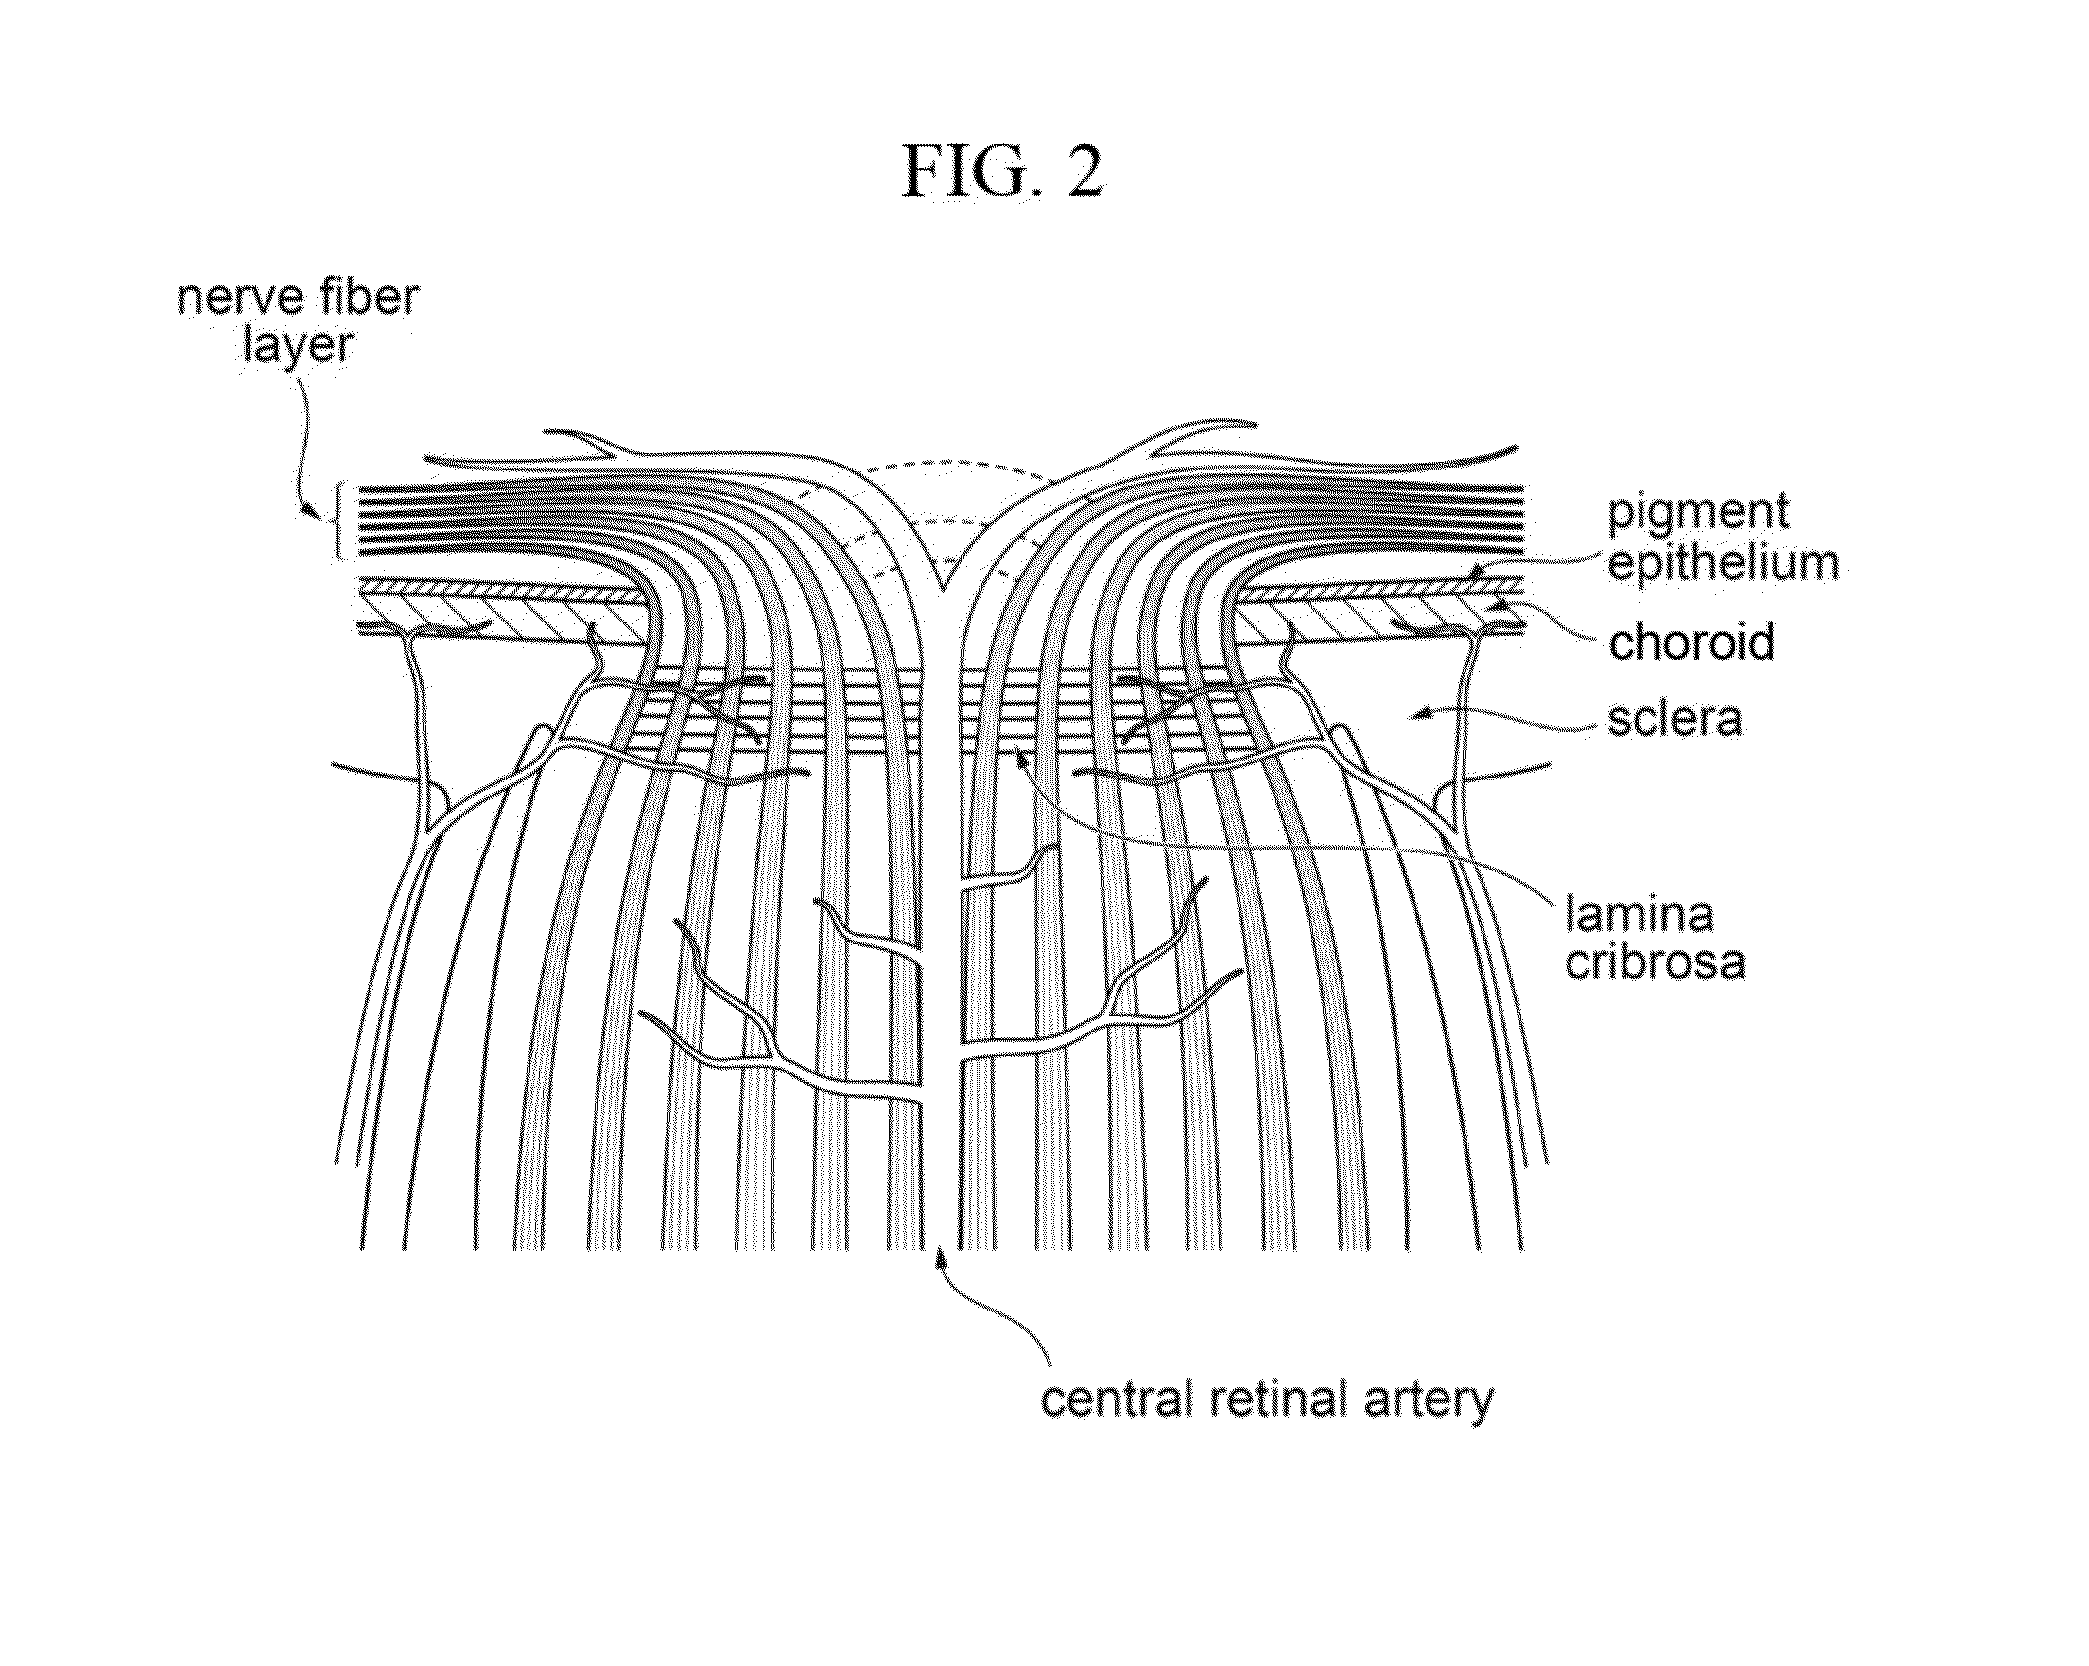 Method for diagnosing glaucoma by observing connective tissue of lamina cribrosa